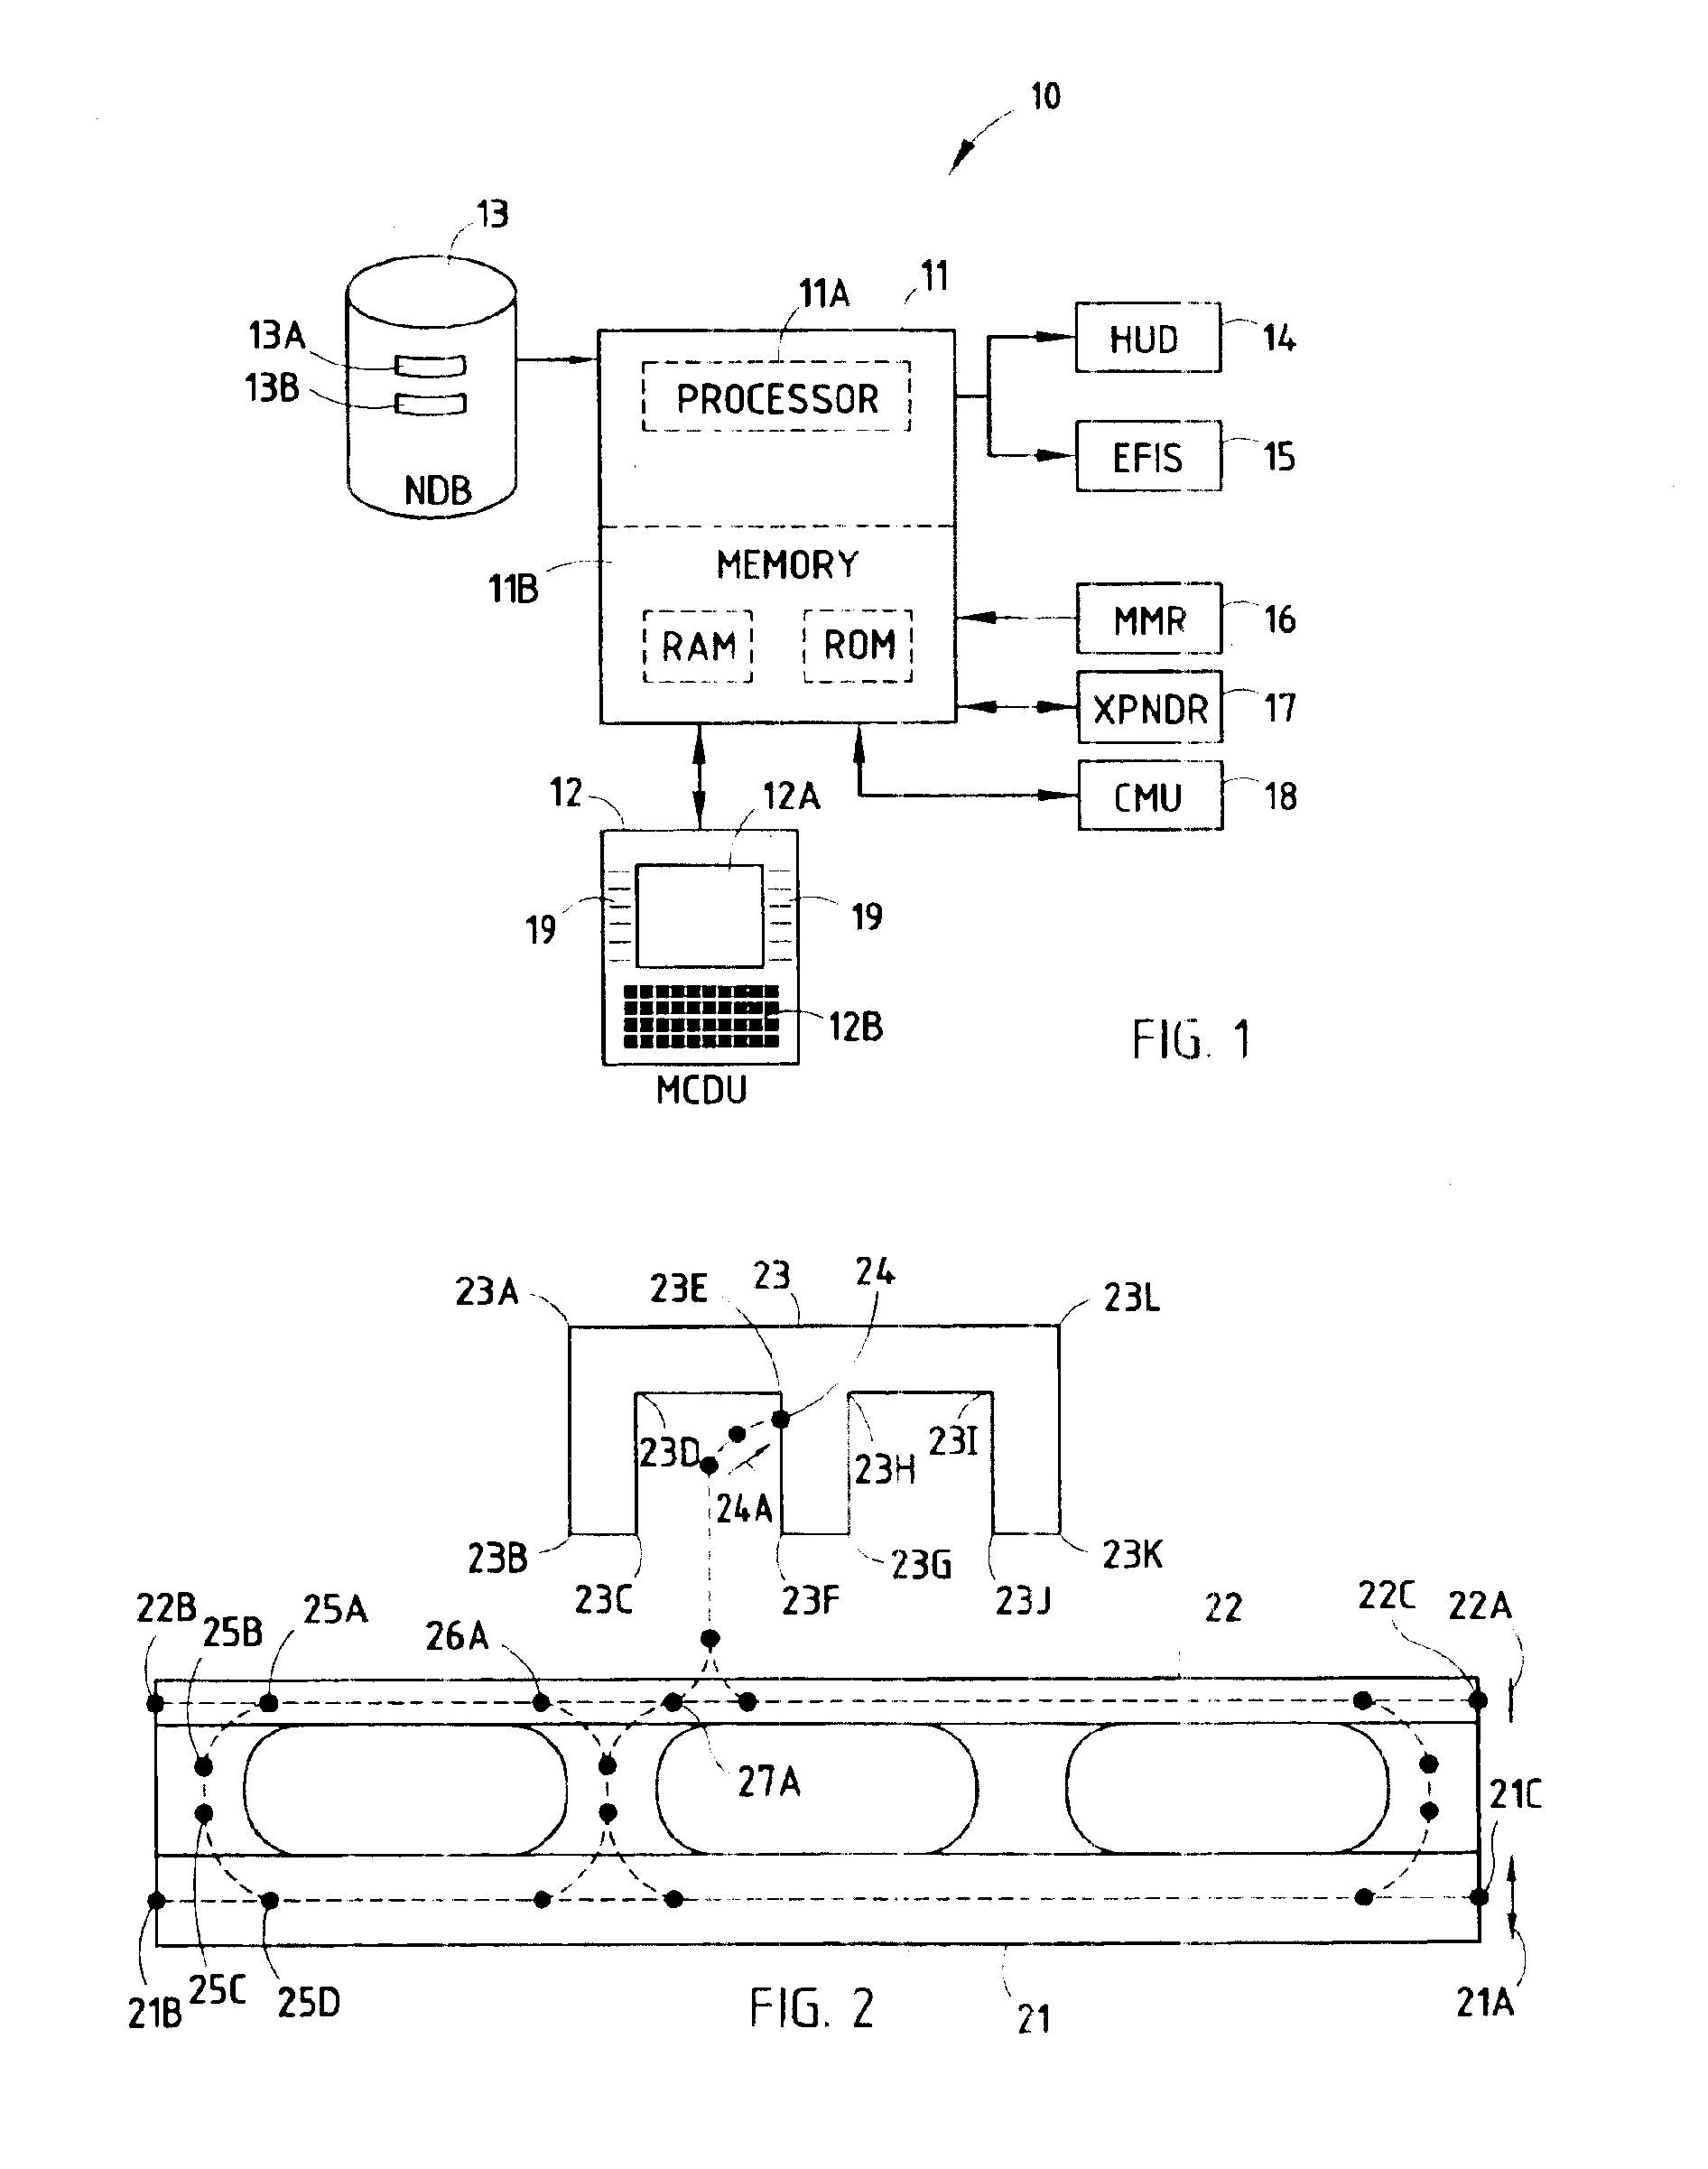 Airport map system with compact feature data storage